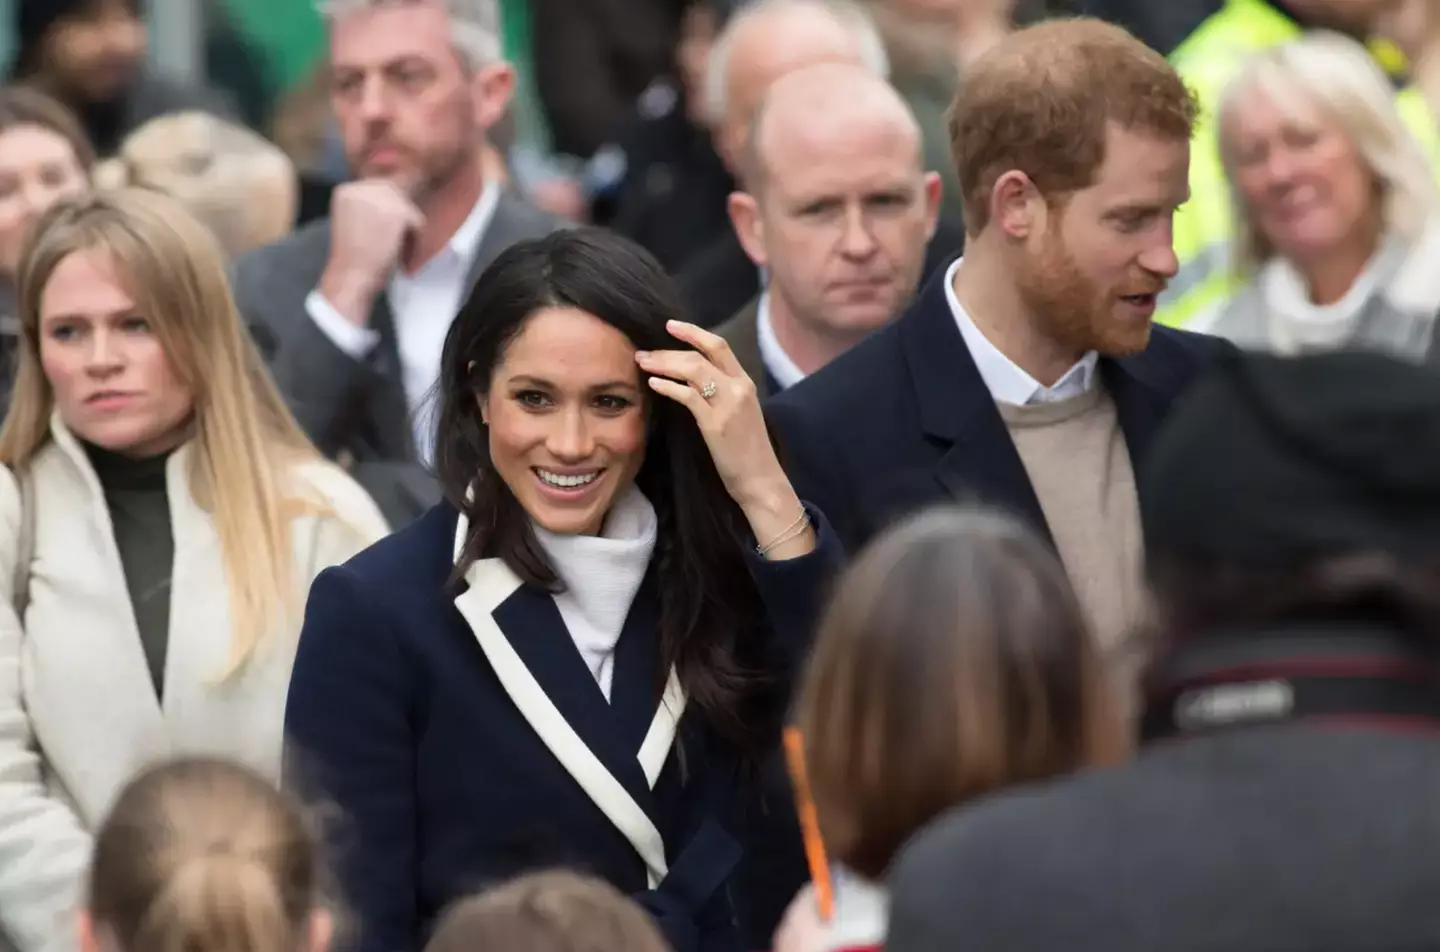 King Charles III gave special mention to his son, Prince Harry, and Harry’s wife, Meghan Markle when he addressed the nation on Friday.